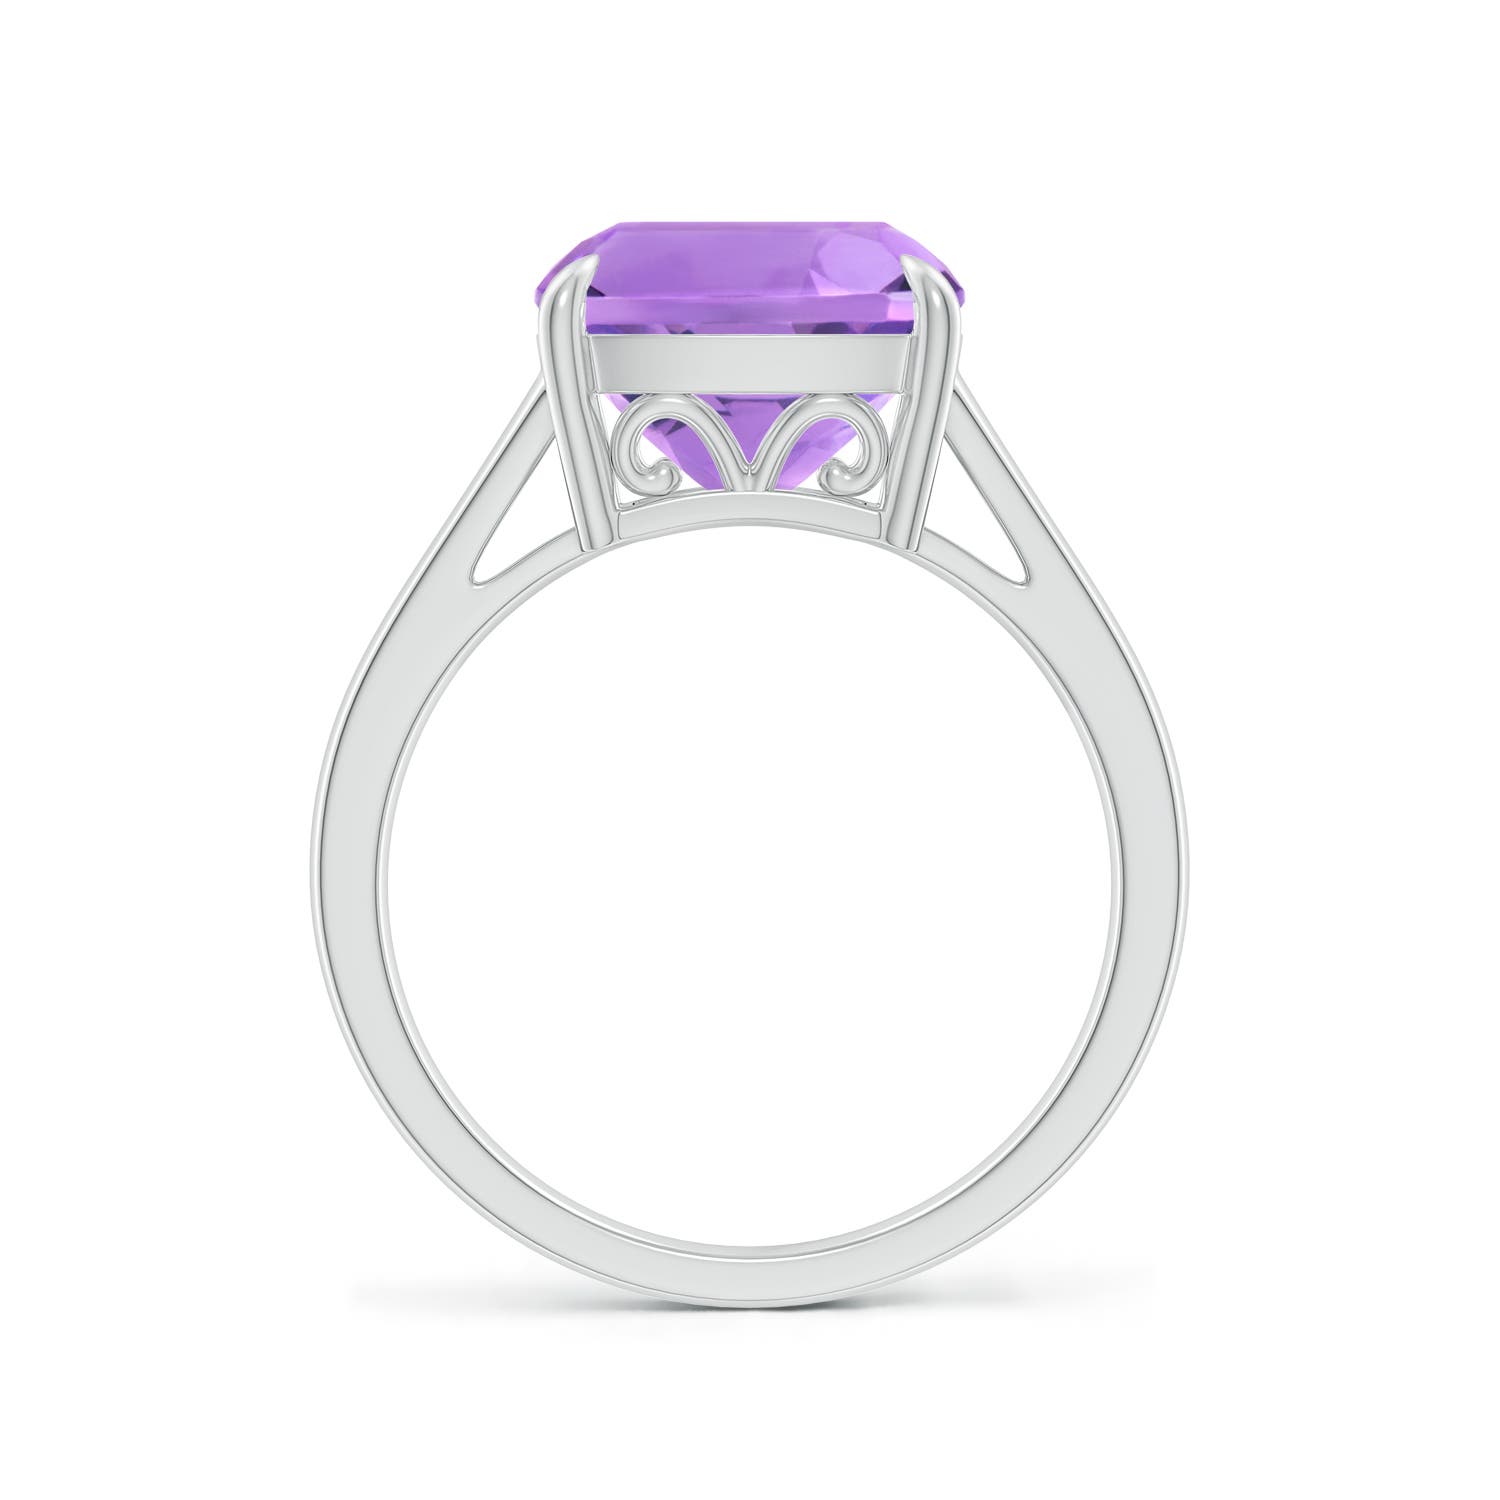 A - Amethyst / 3.65 CT / 14 KT White Gold